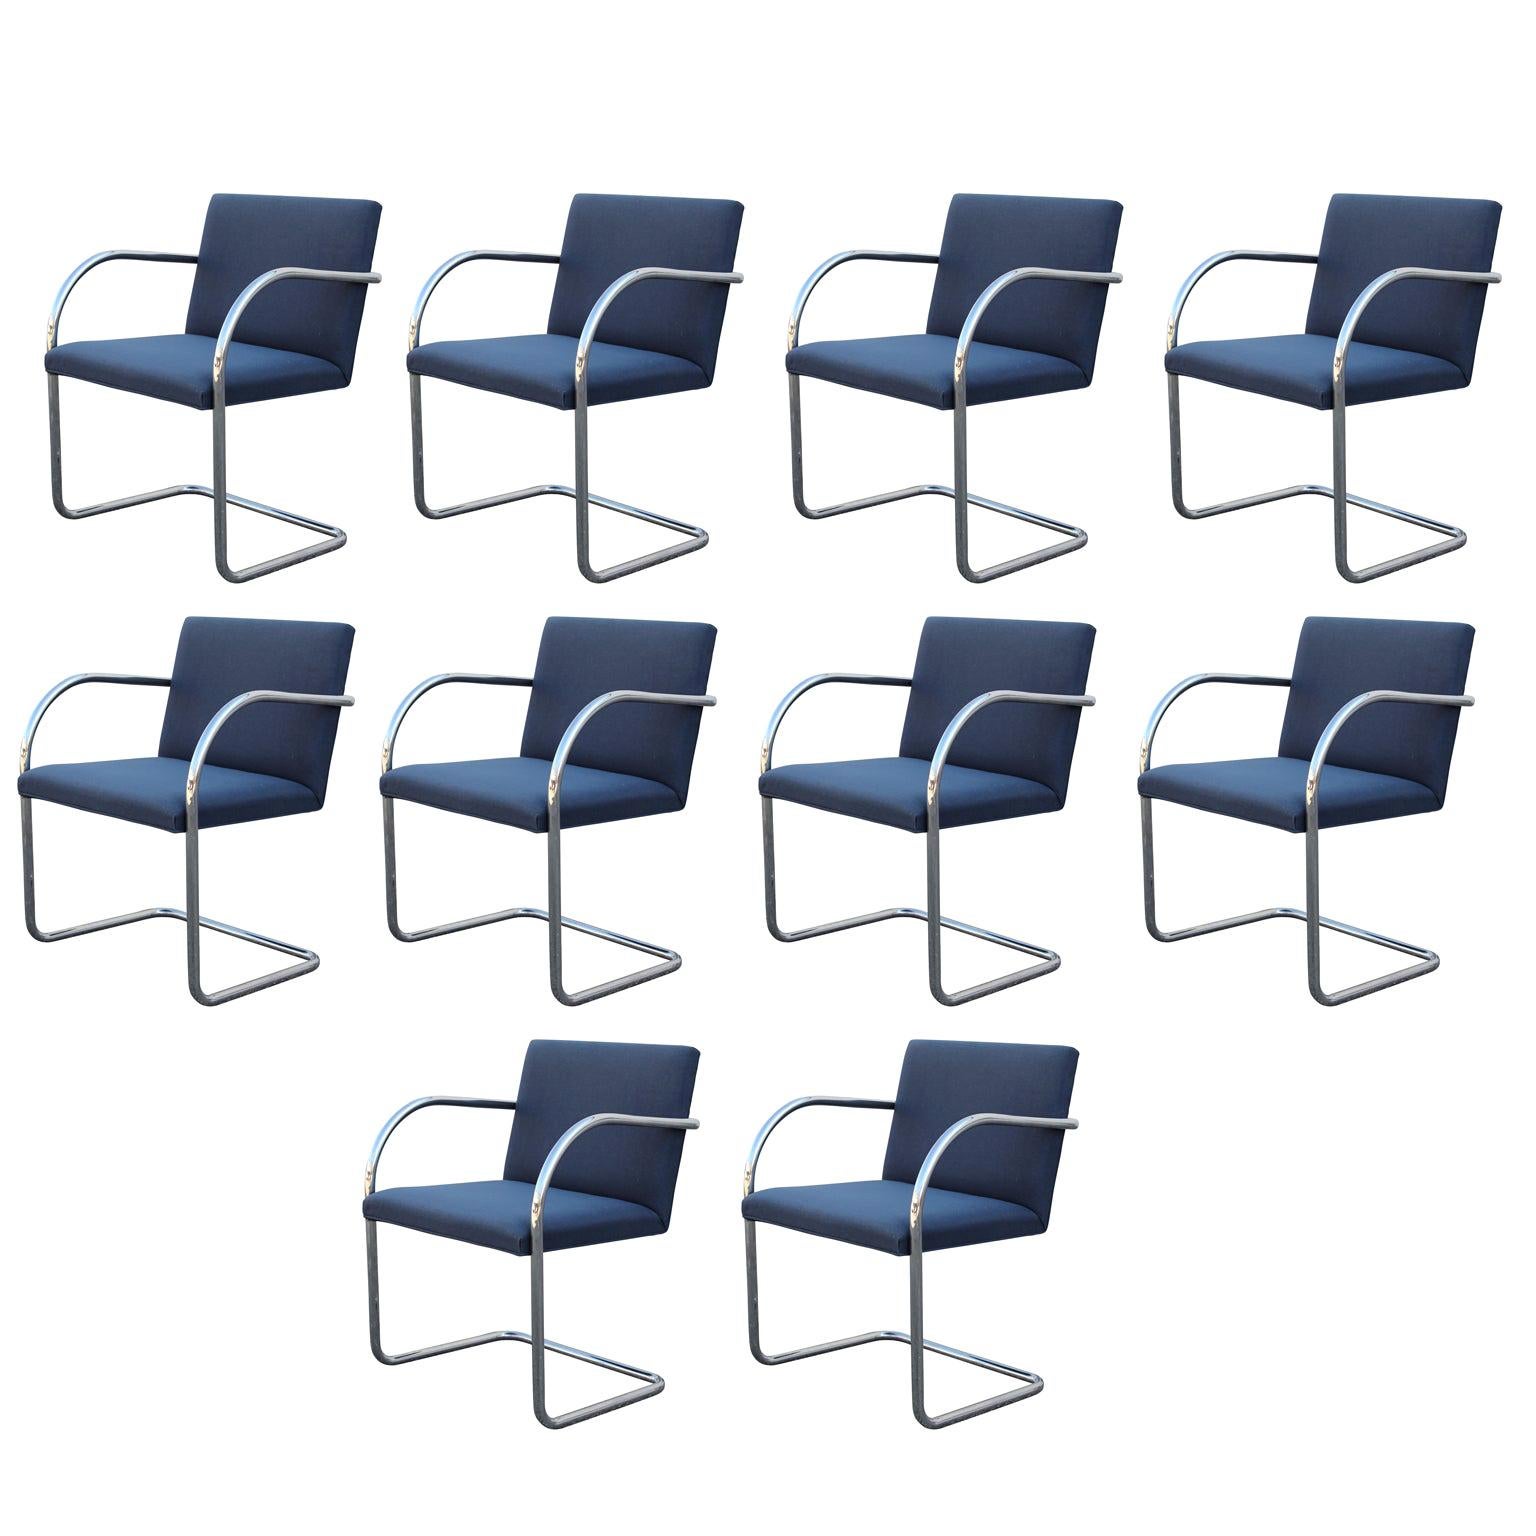 Set of 10 Mies van der Rohe for Knoll Tubular Chrome Brno Dining Chairs